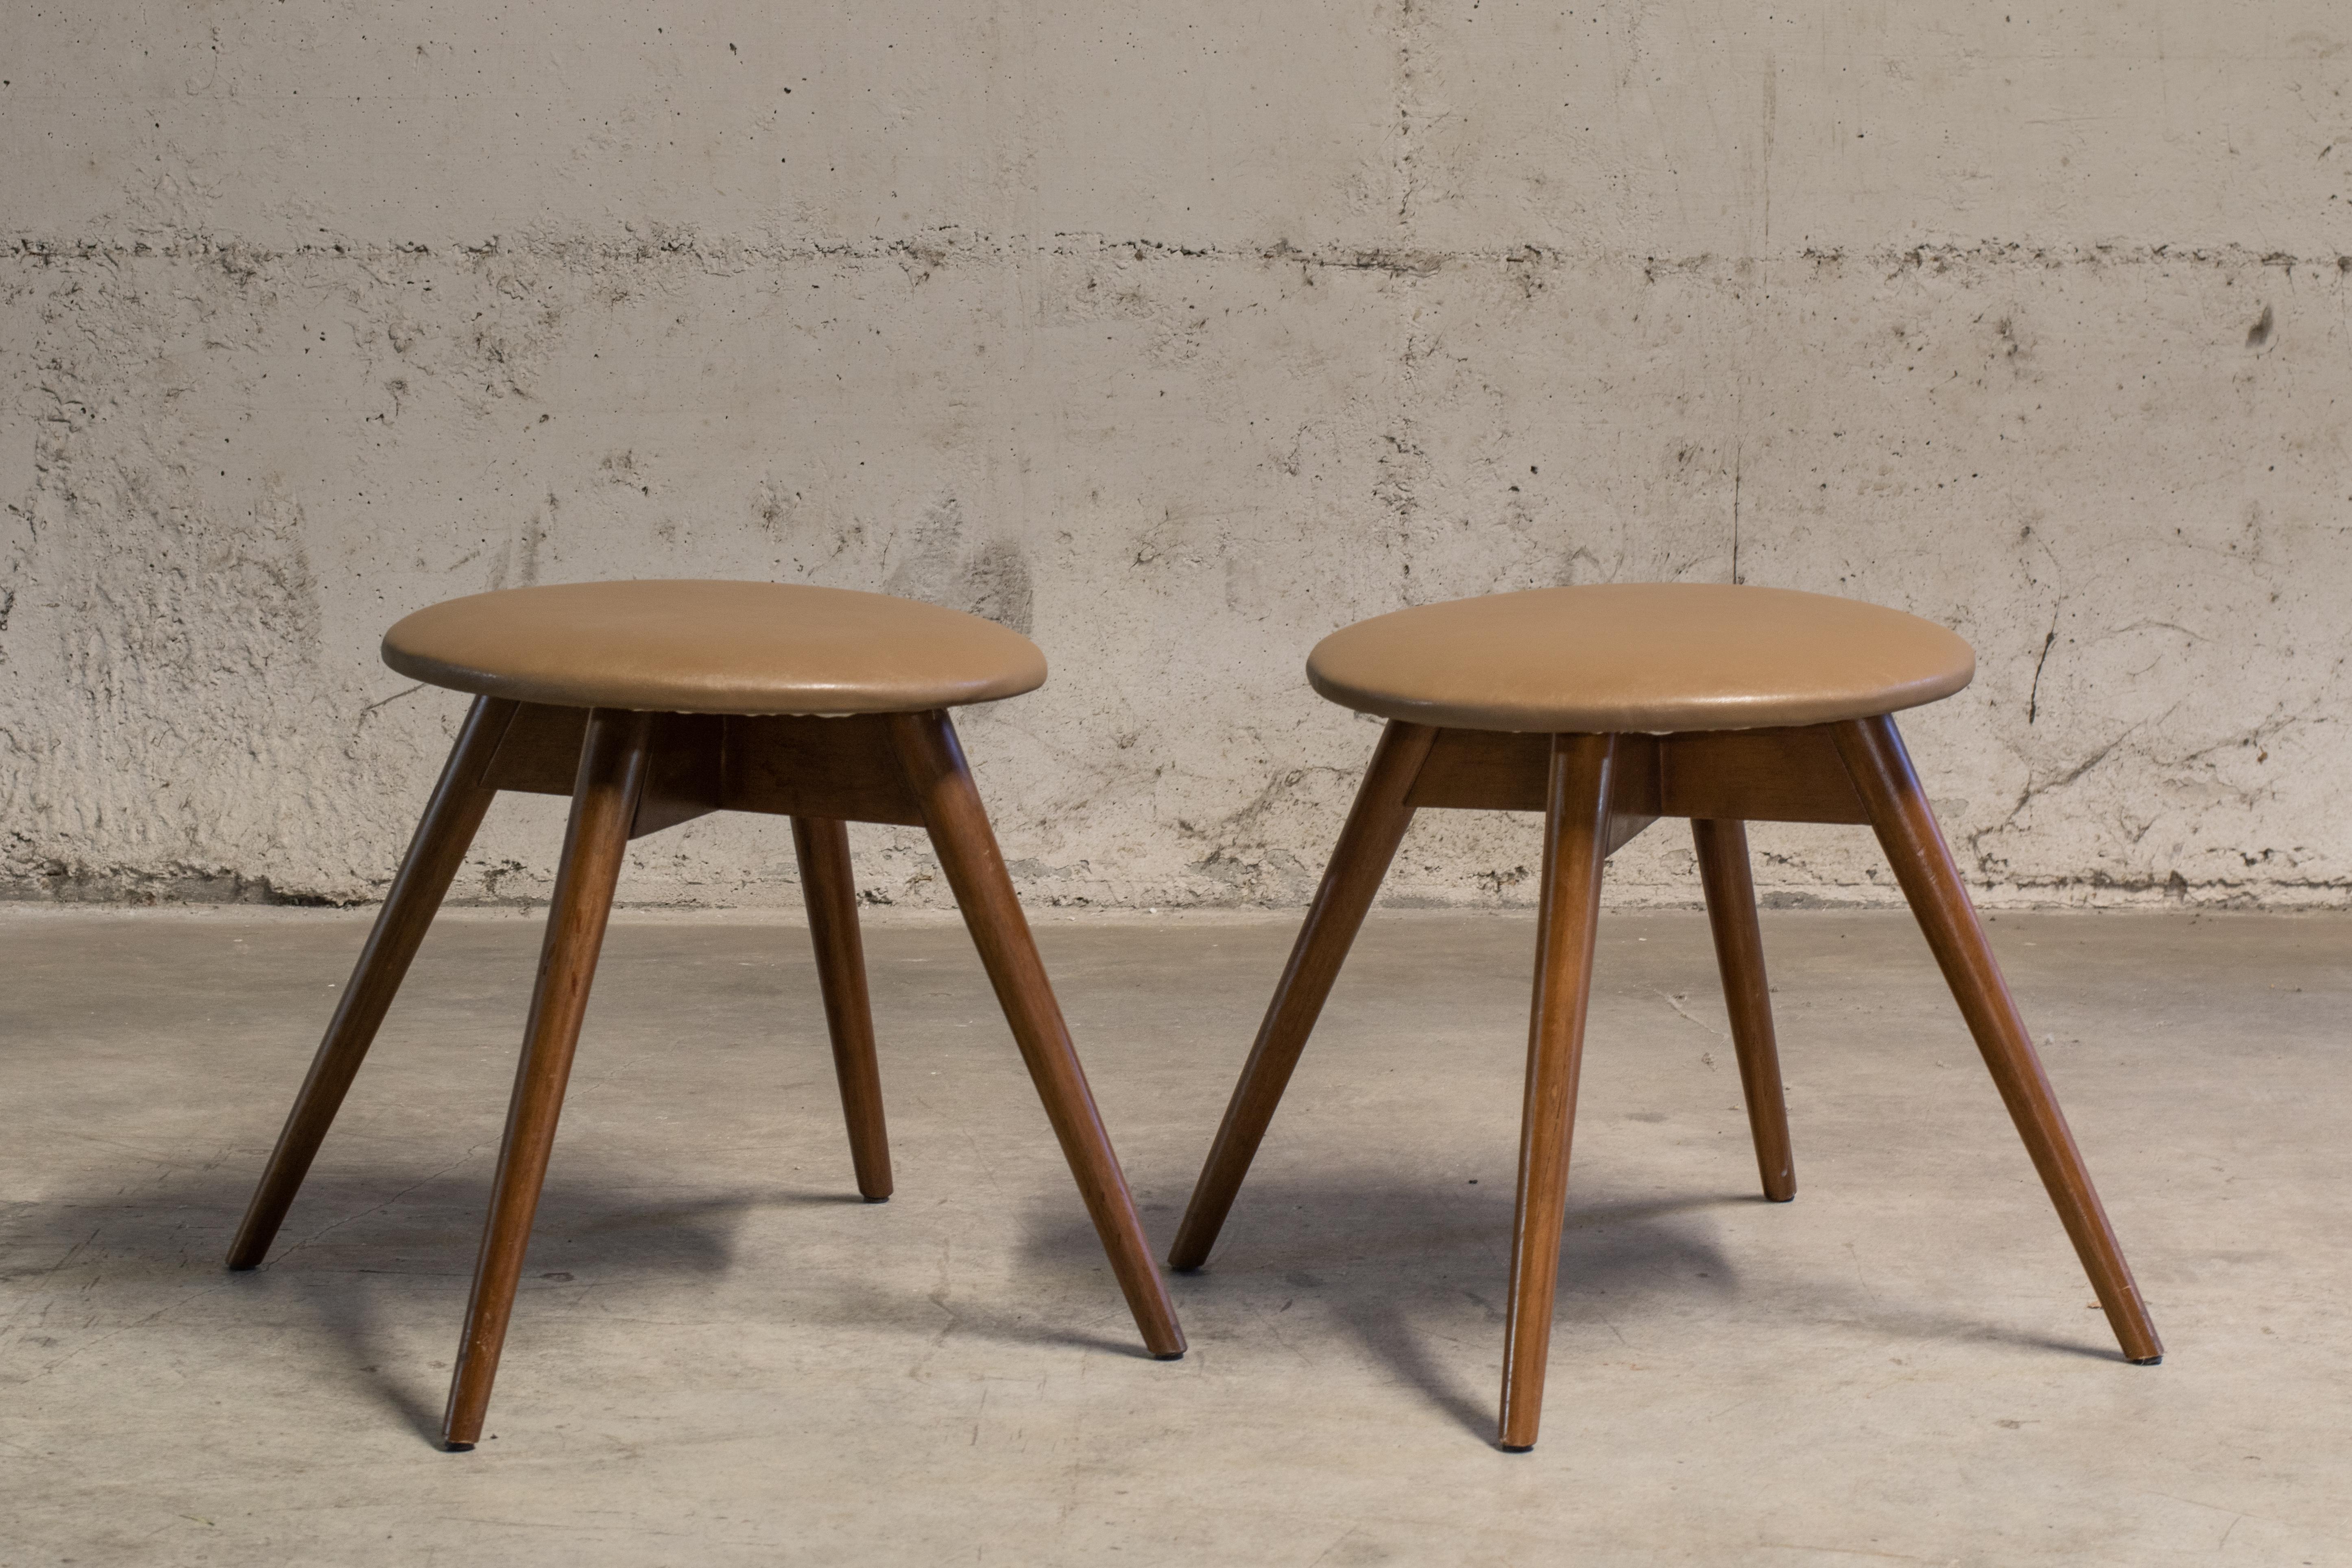 Pair of Brazilian Modern Wood Stool, Fahrer In Good Condition For Sale In Montecatini Terme, Toscana